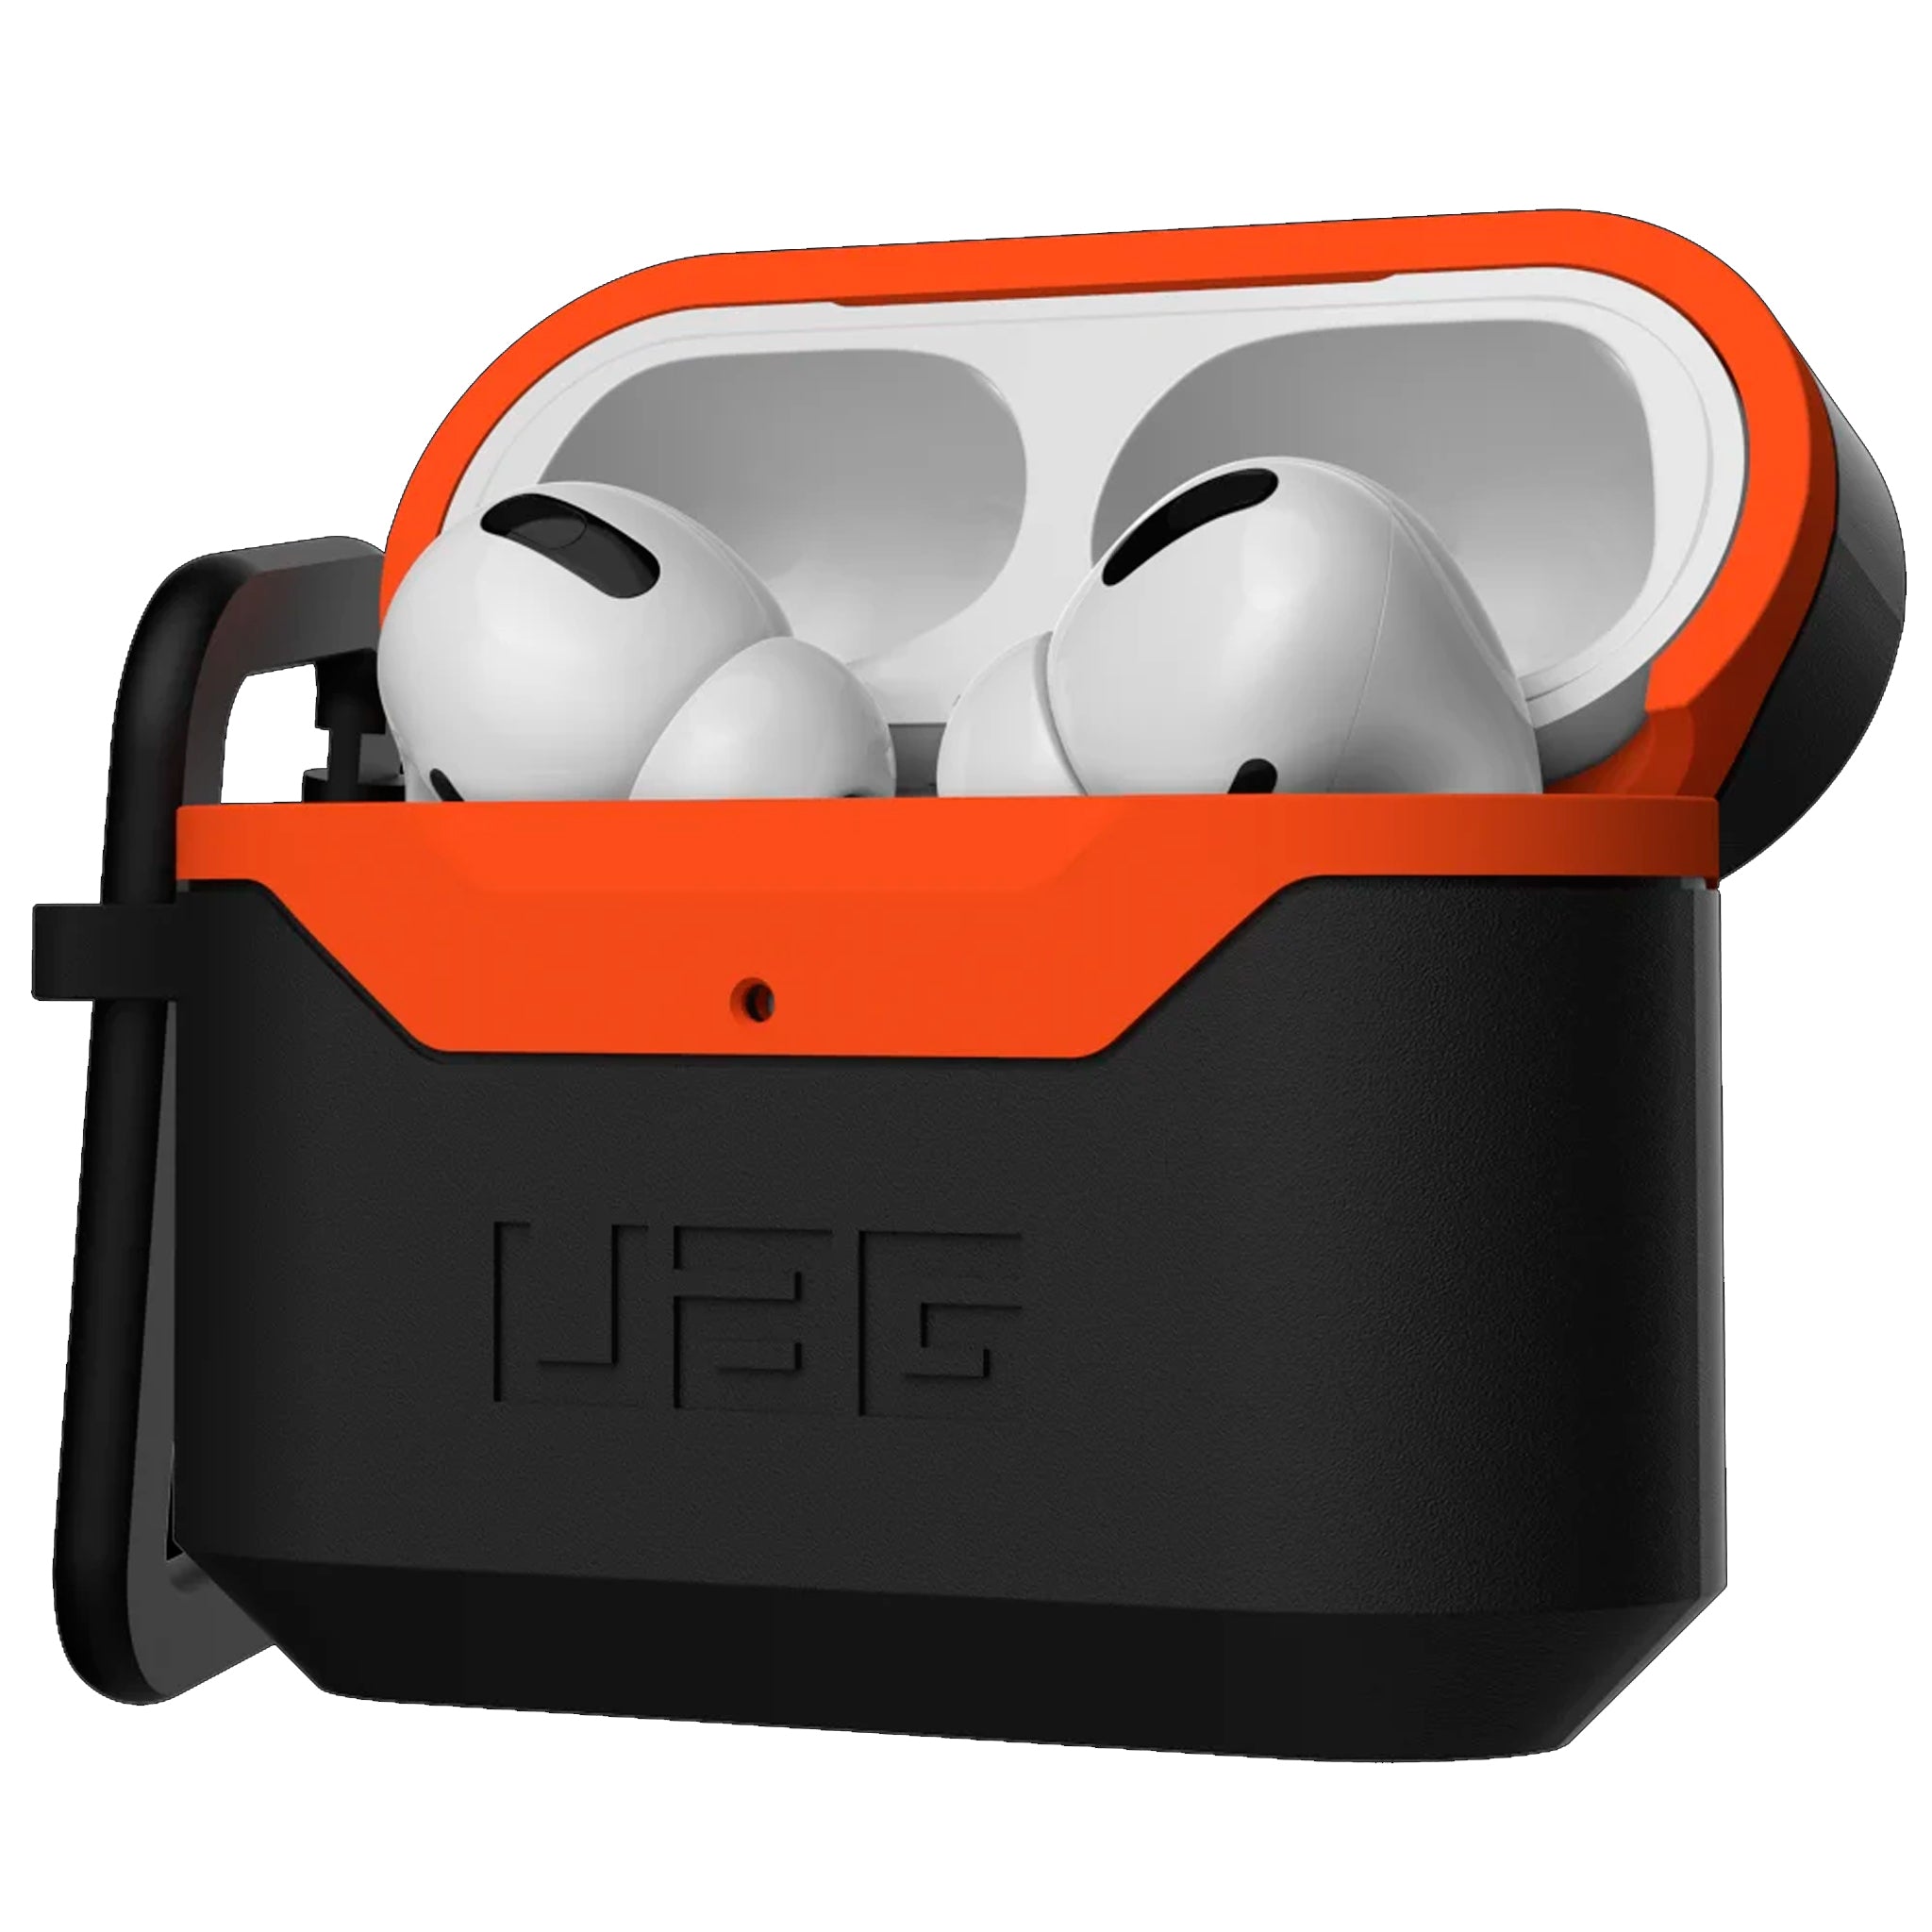 UAG - Standard Issue 001 Hard Case For Apple Airpods Pro - Black And Orange